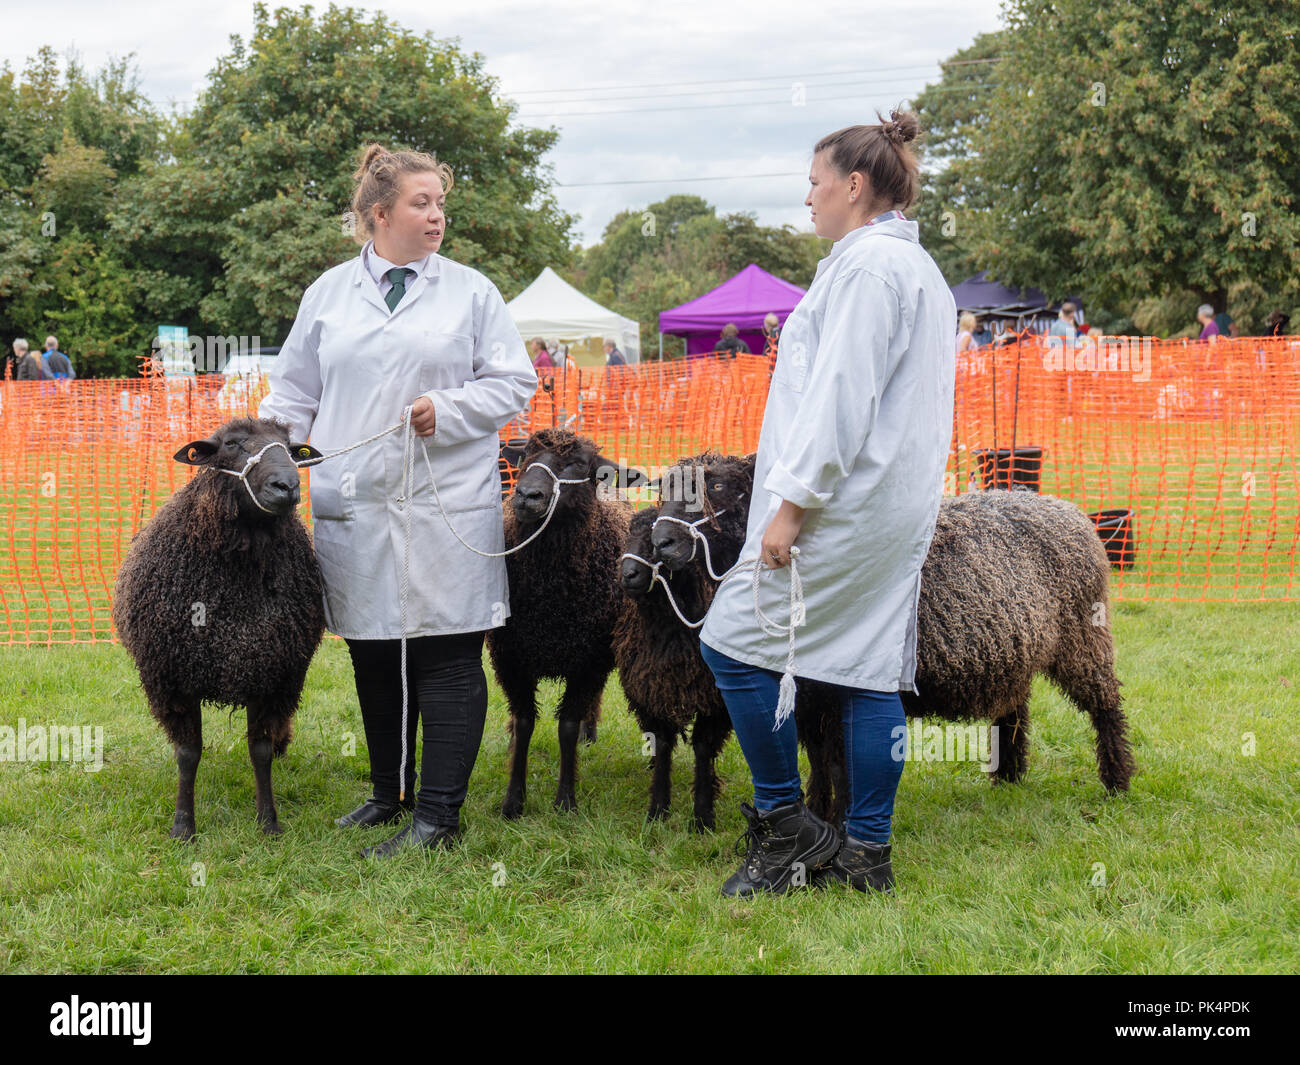 Findon, Sussex, UK; 8th September 2018; Two Women in White Coats Wait with Four Black Sheep for Competition Judging to Take Place  at Sheep Fair Stock Photo